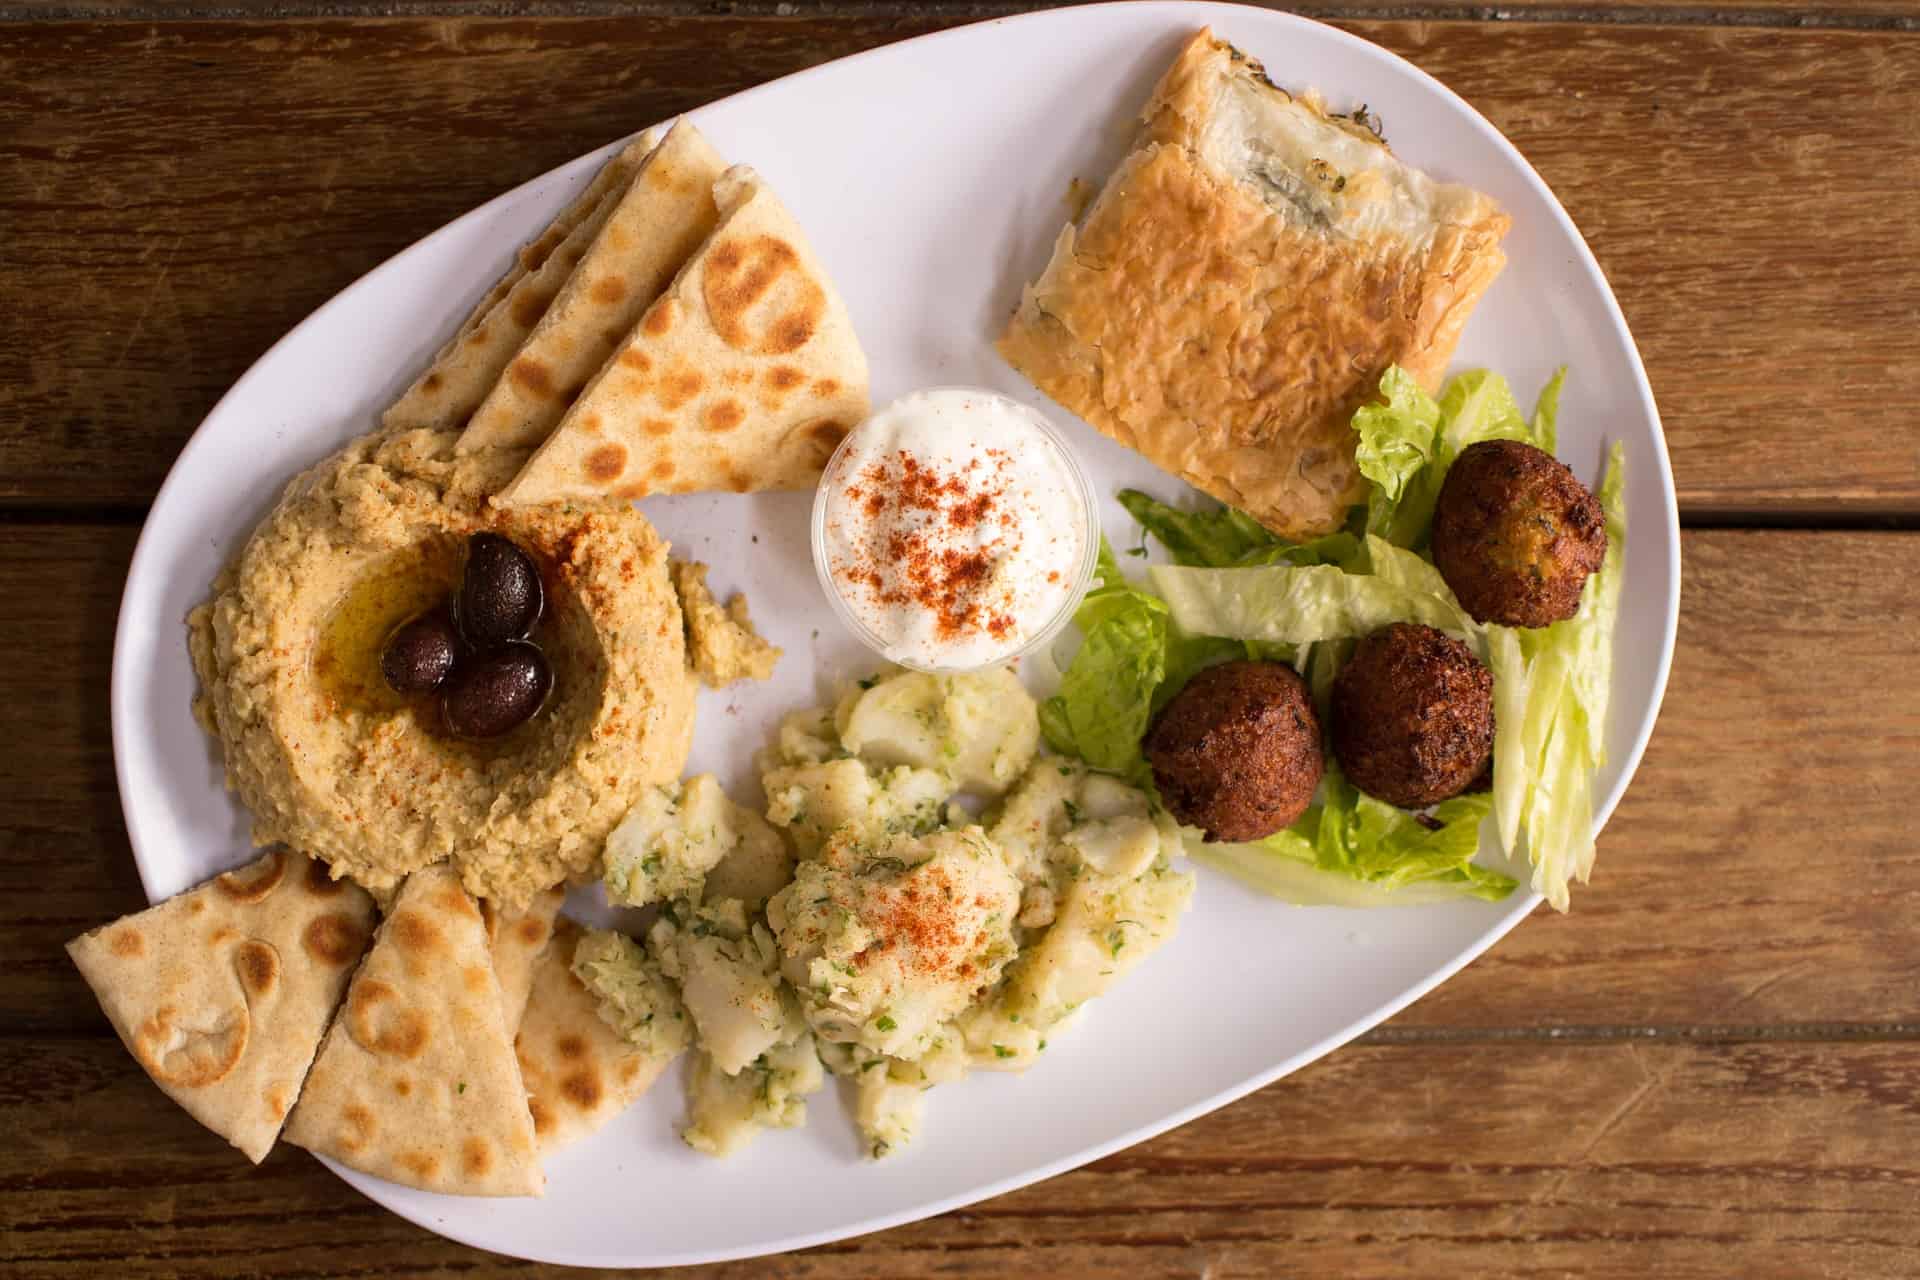 Learning the origins of falafel and hummus